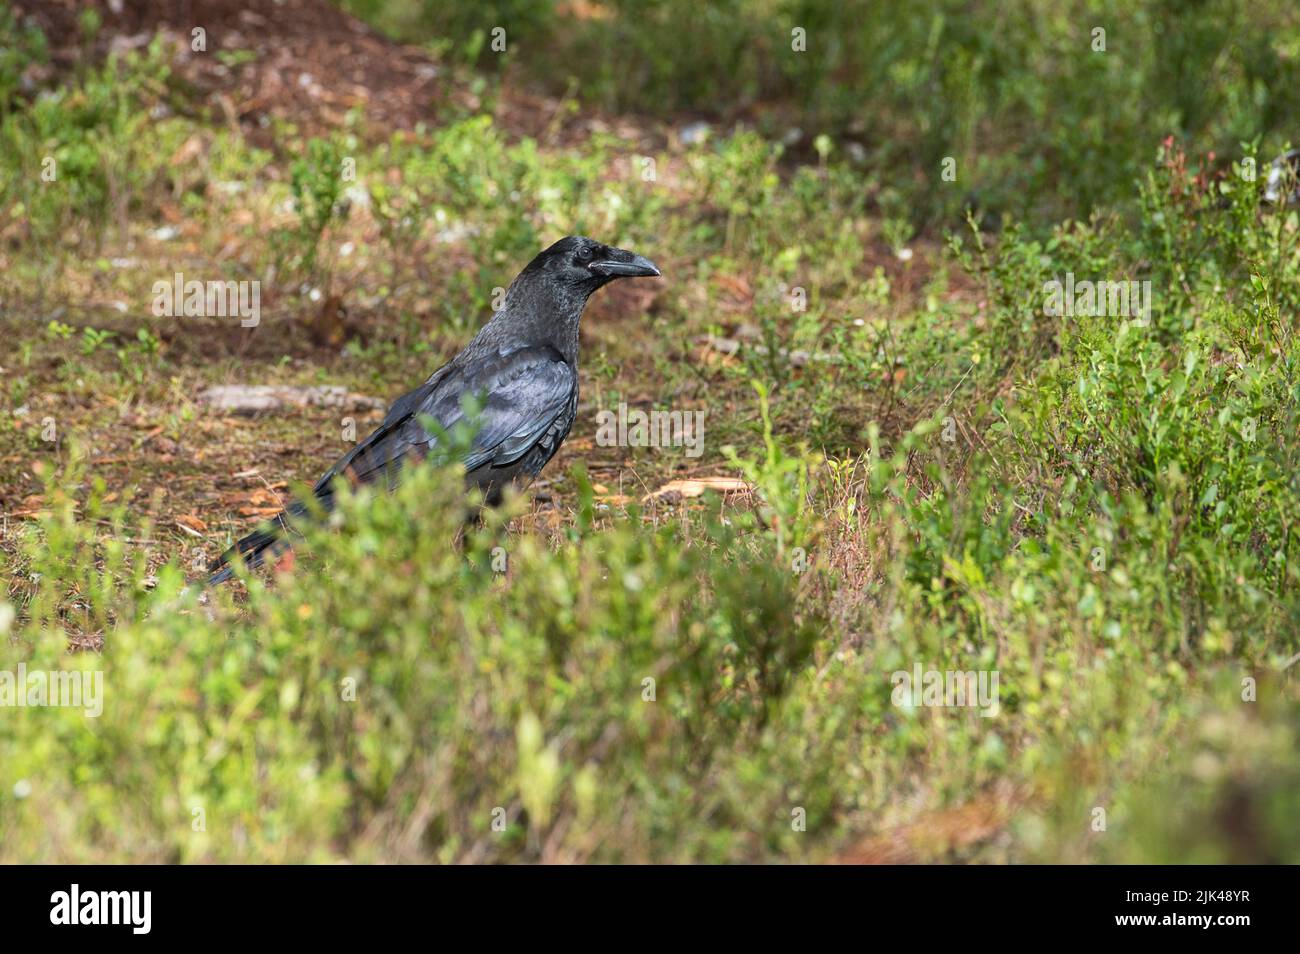 Common raven (Corvus corax) in the taiga forest of Finland Stock Photo